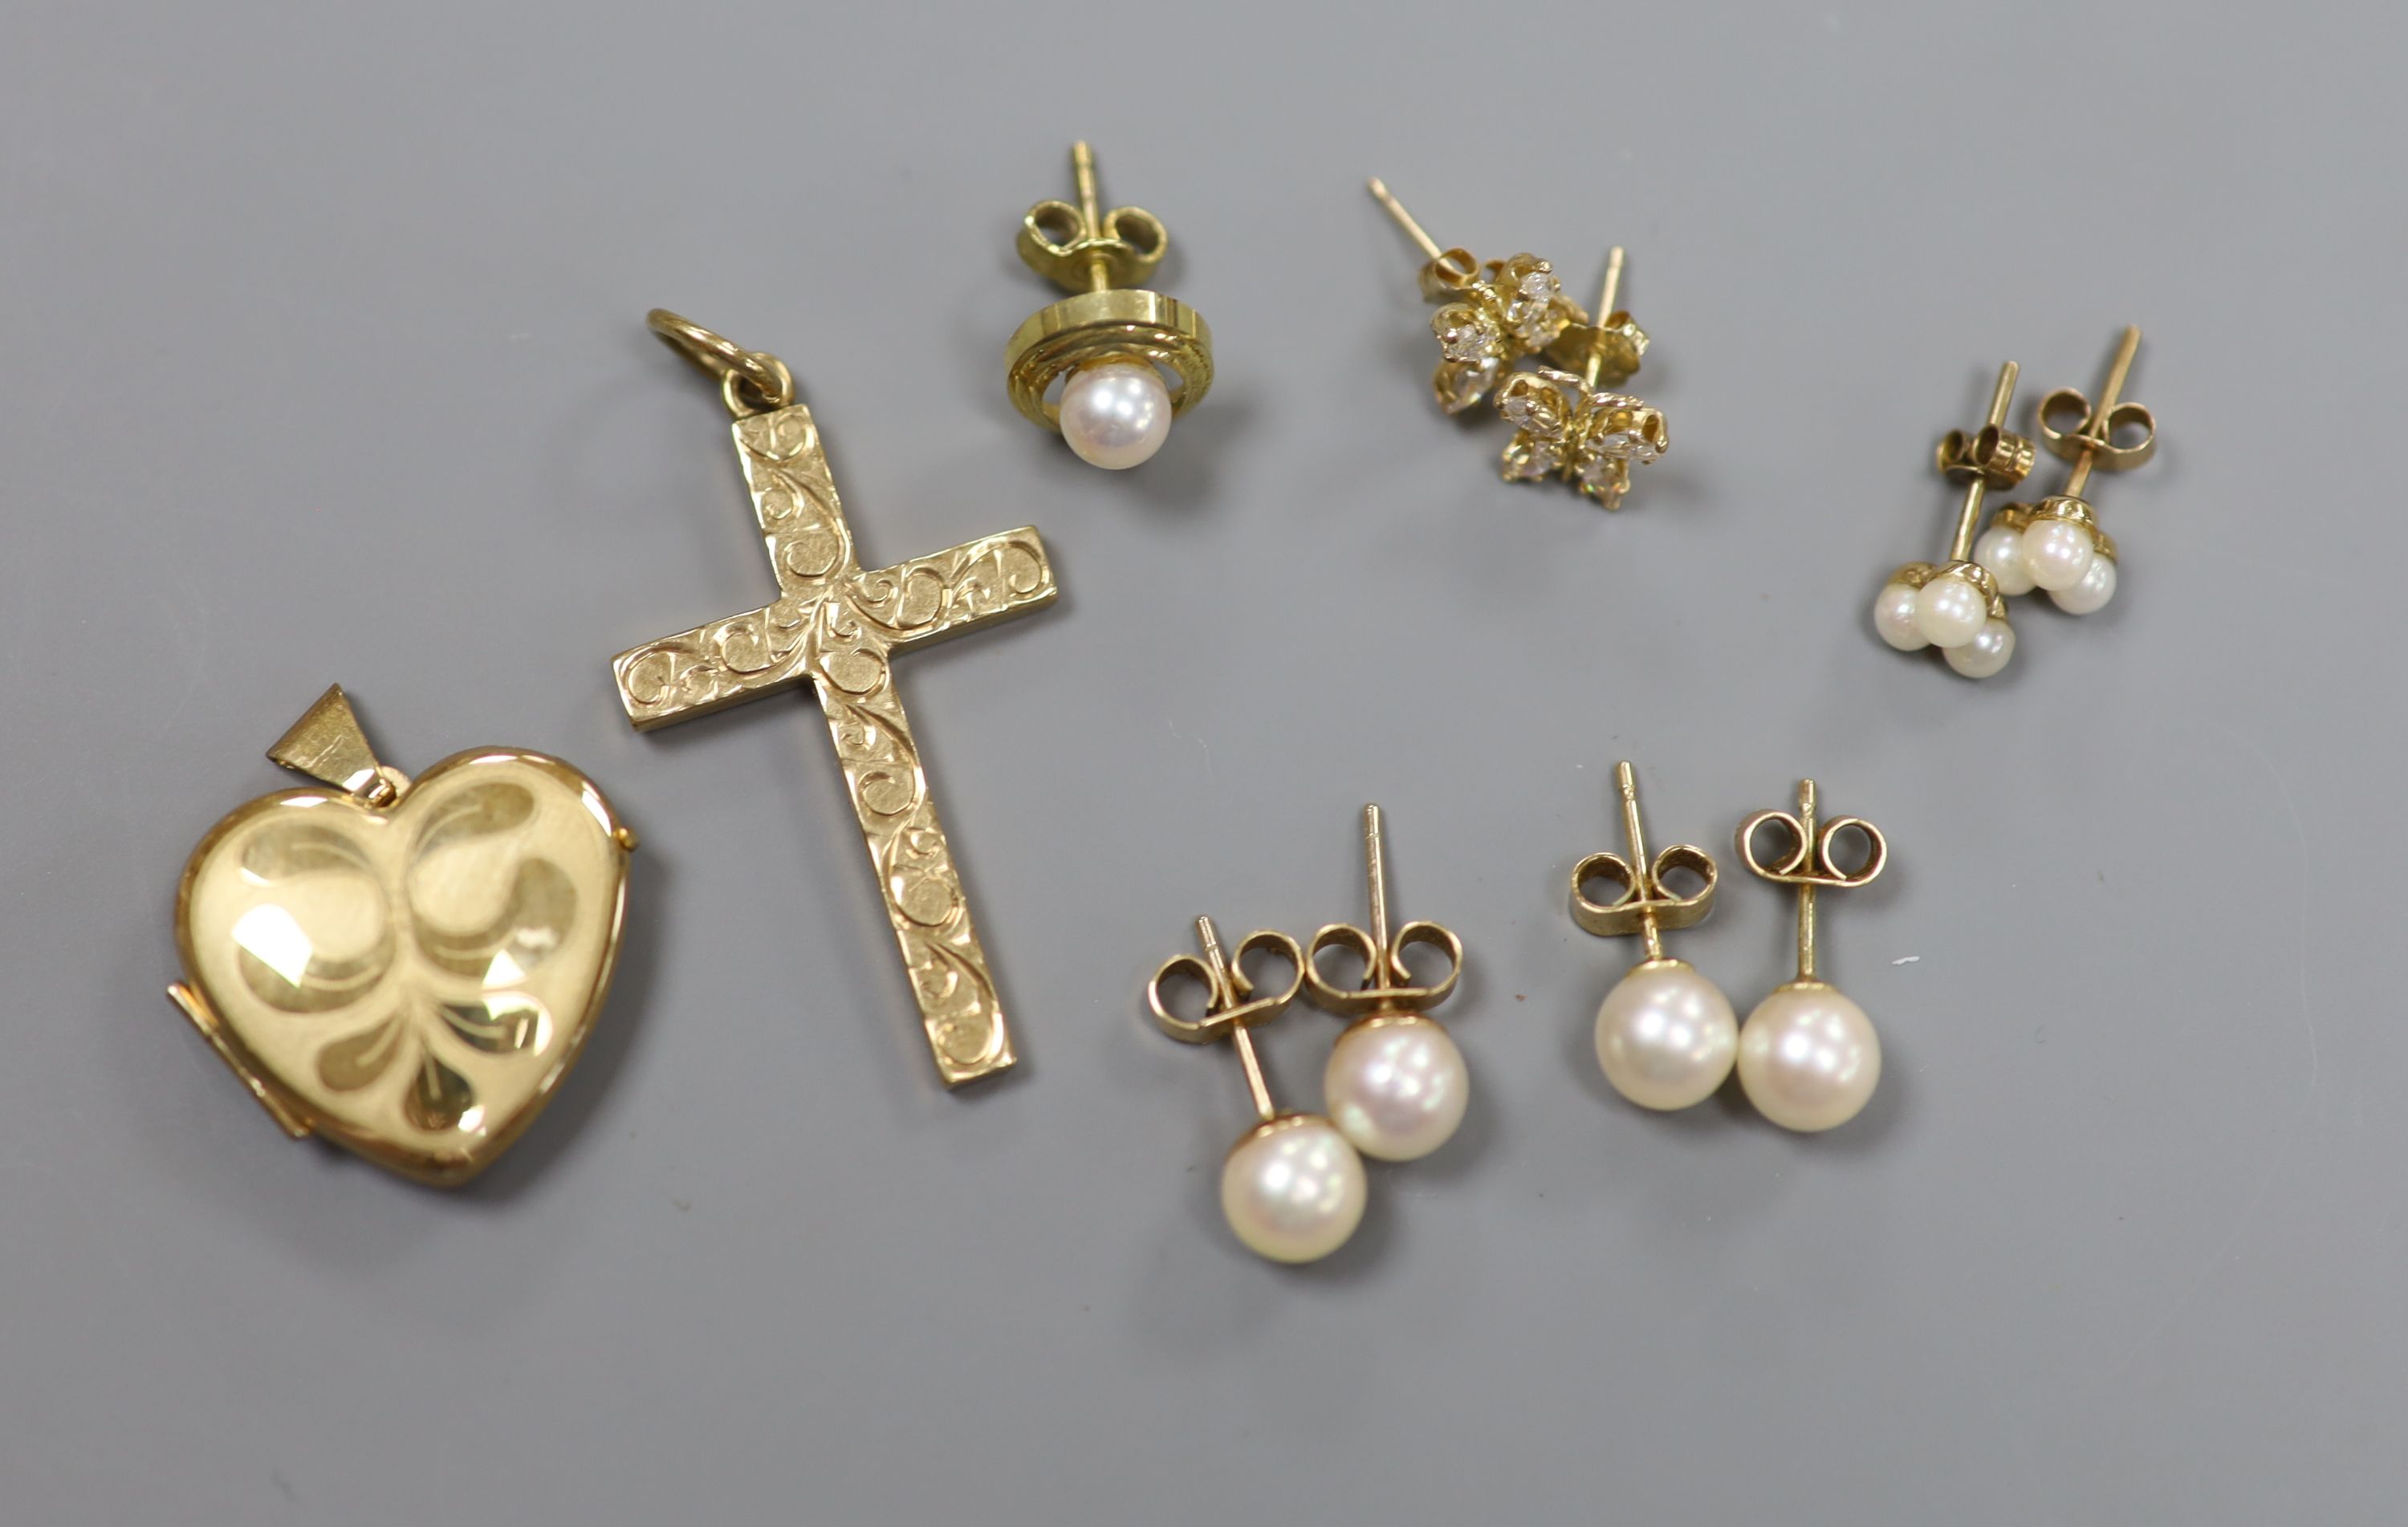 A 9ct gold cross pendant, three pairs of 9ct ear studs, one odd ear stud and a 9ct gold heart pendant